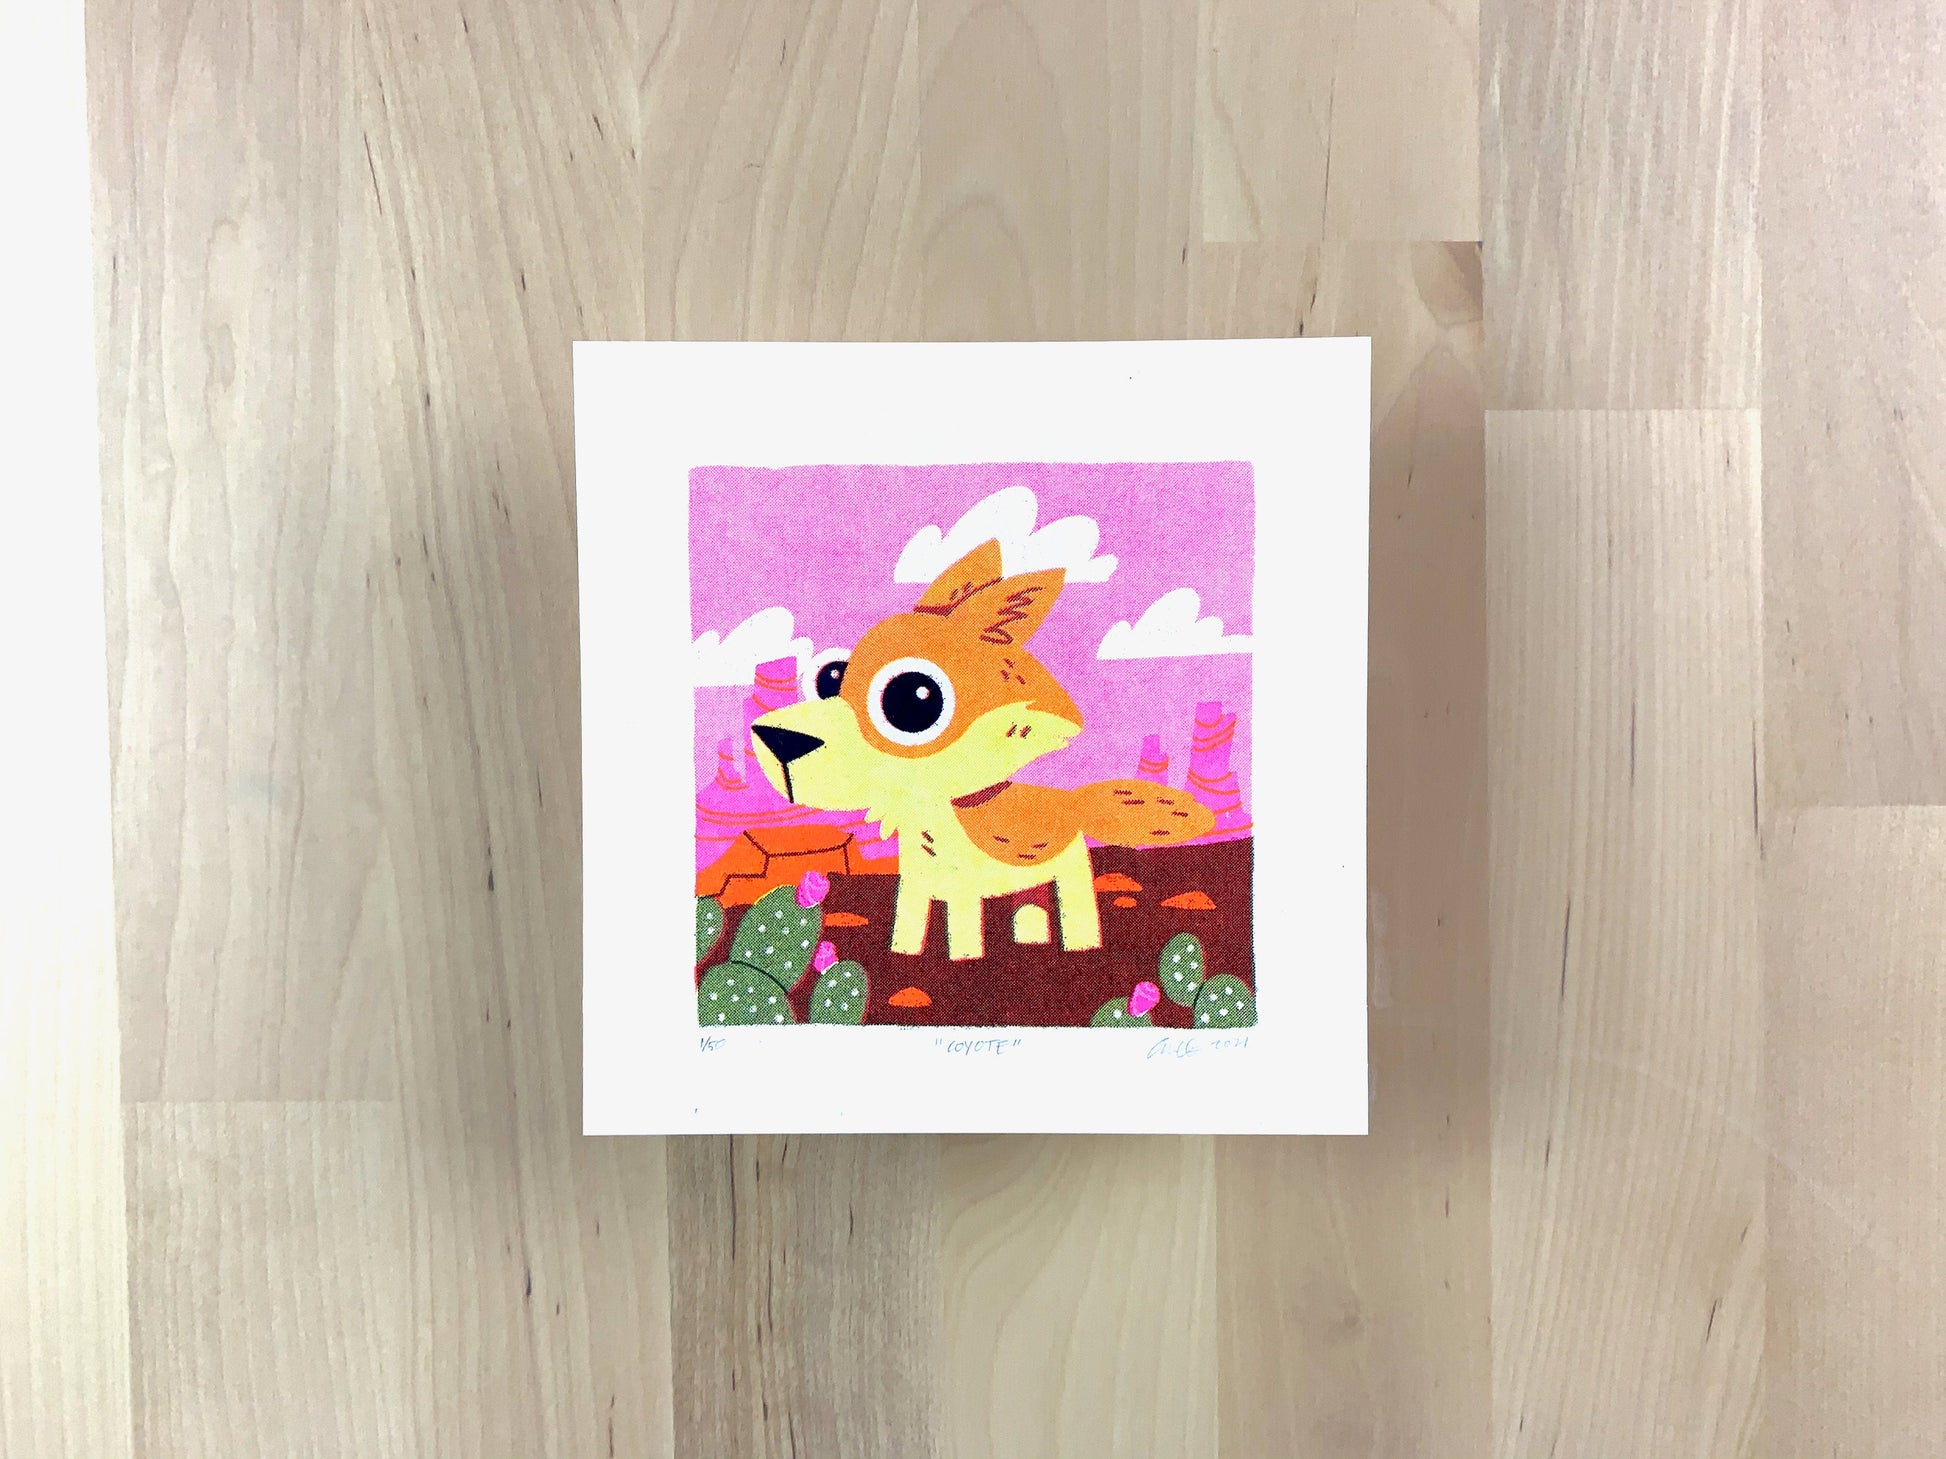 Risograph print of a cute coyote illustration in a pink desert scene.